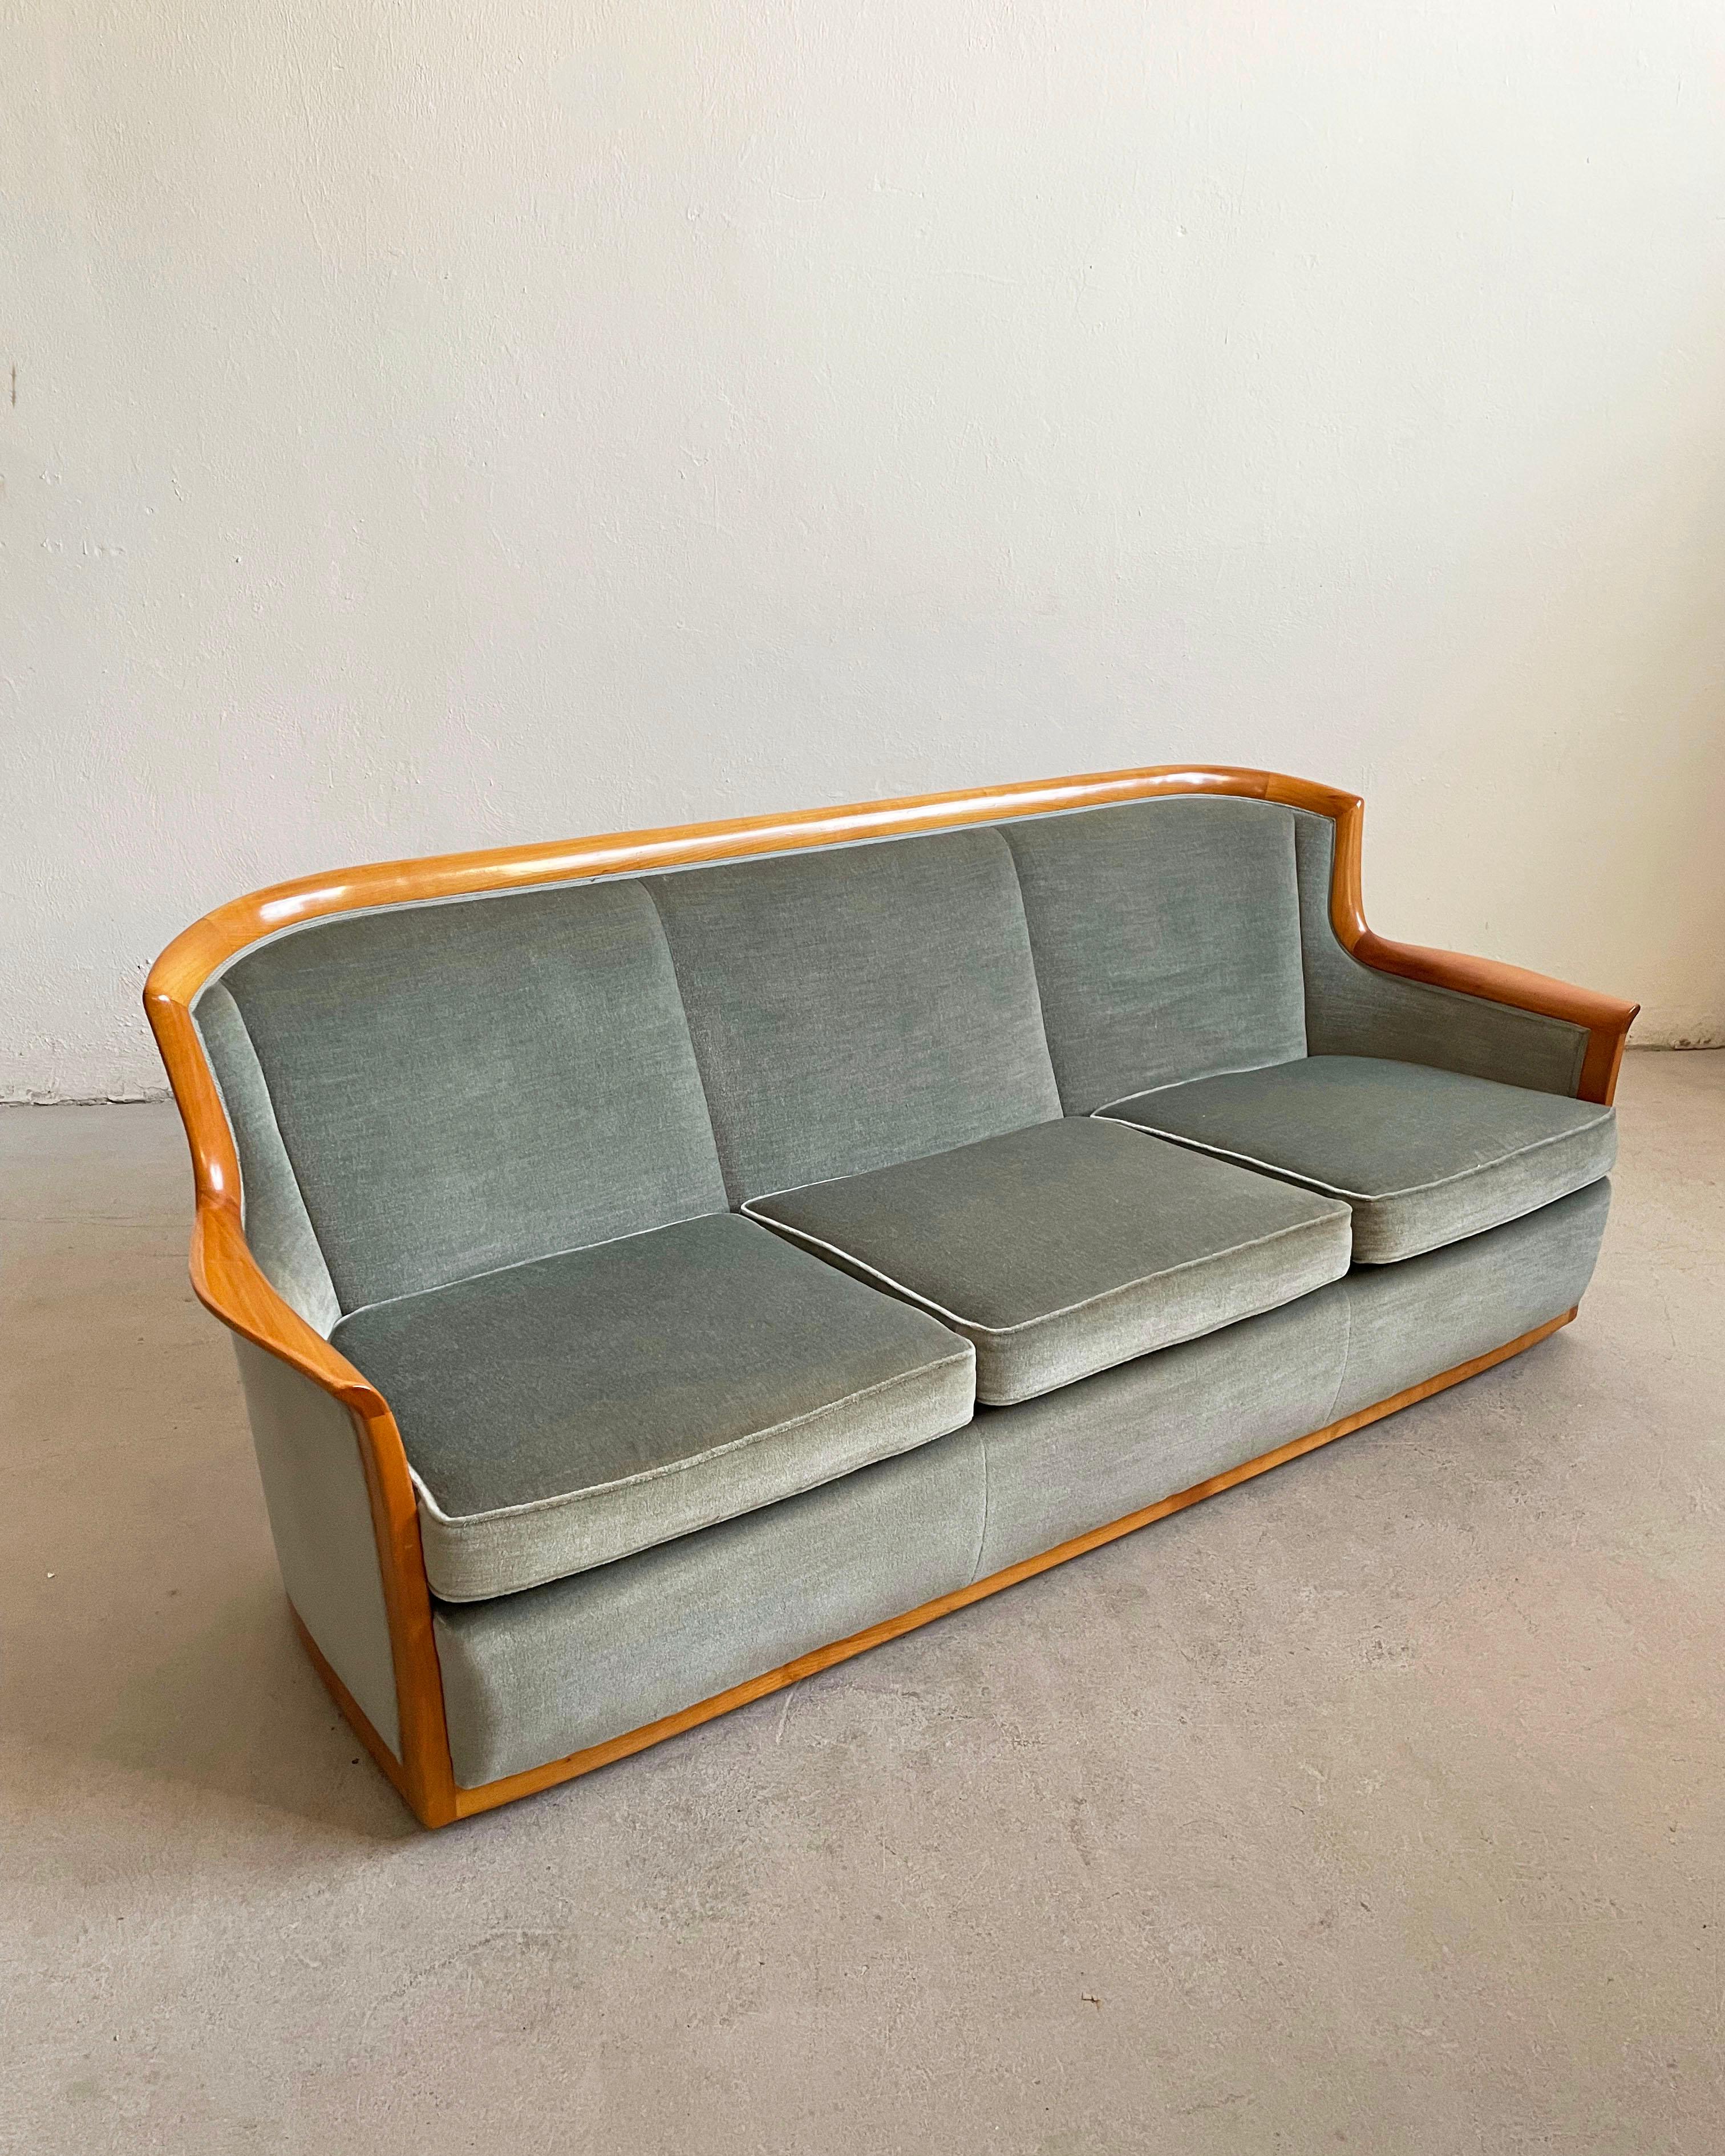 Vintage Scandinavian Mid-century living room from the 1960s.

The seating group consists of a 3-seater sofa and two arm chairs with curved backs, in original blue gray velvet upholstery, standing on metal casters, and having a solid cherry wood trim